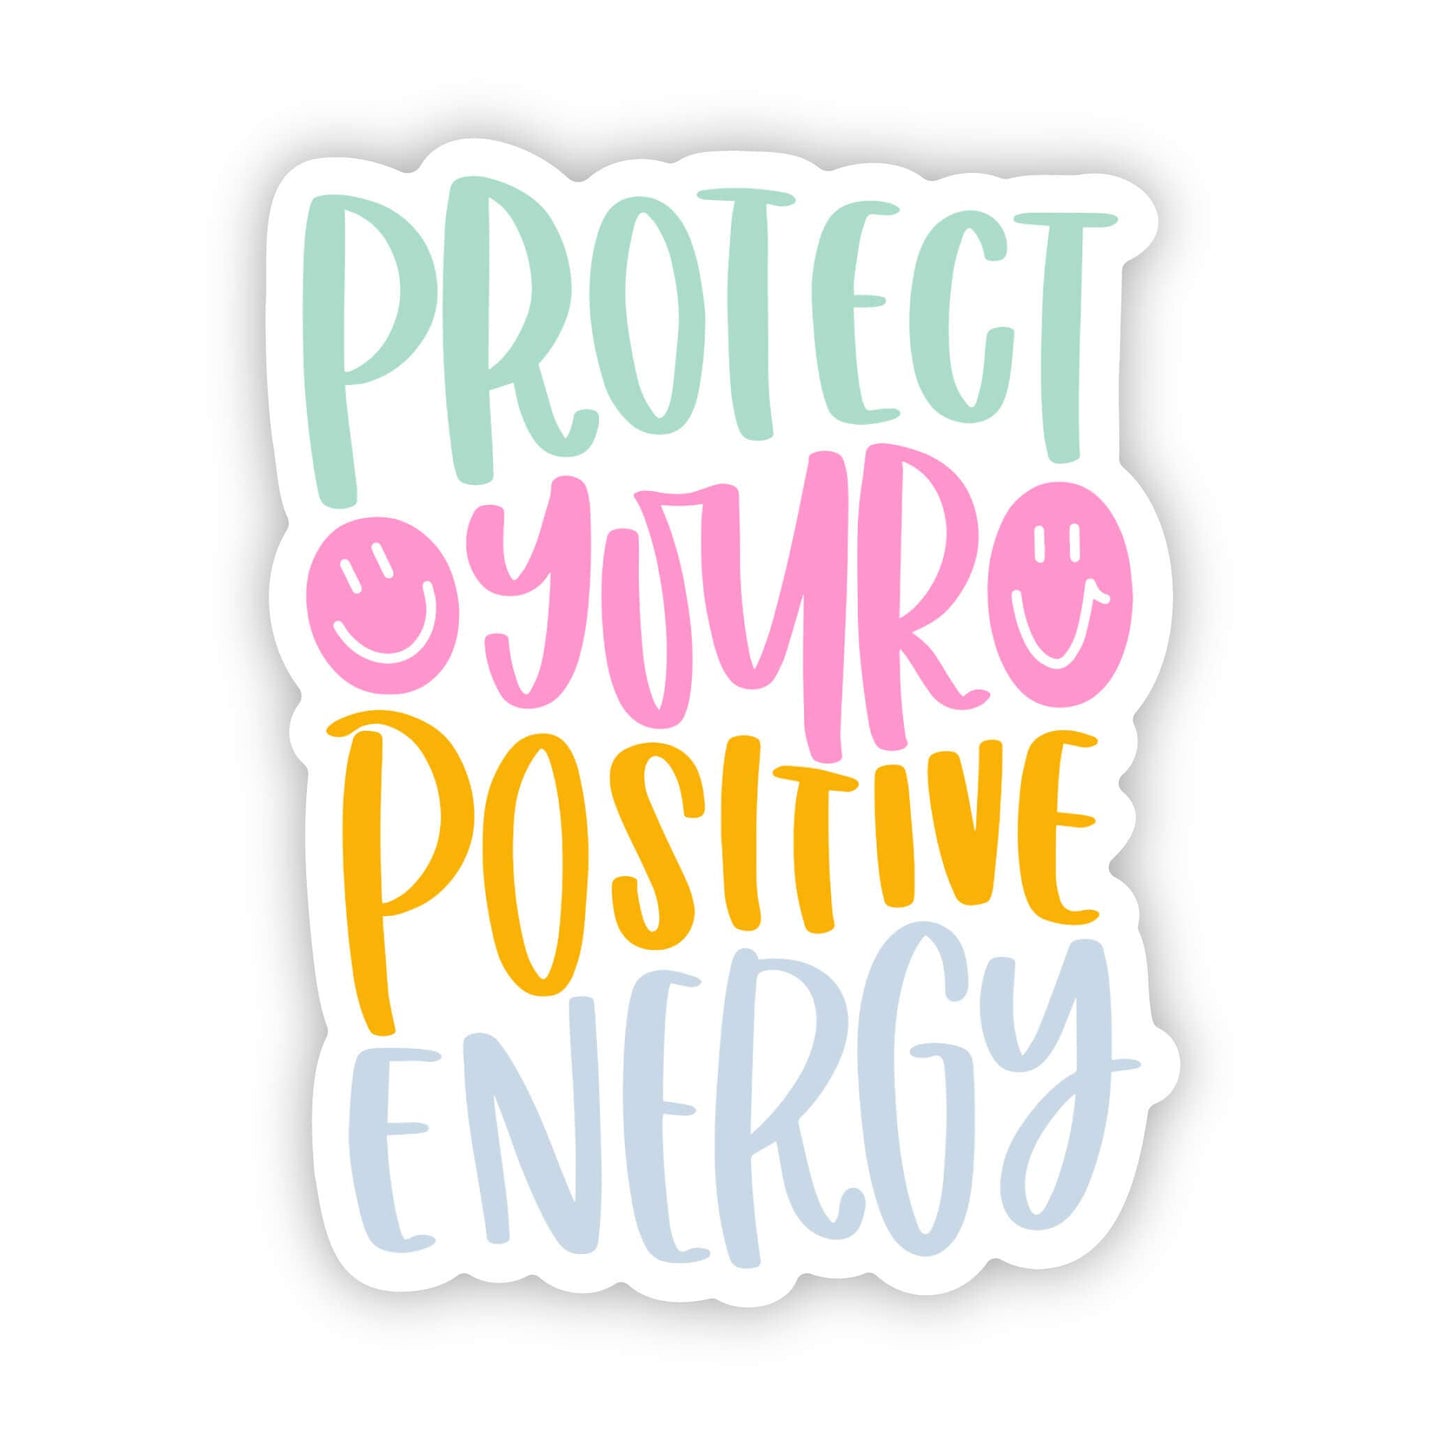 "Protect Your Positive Energy" Sticker